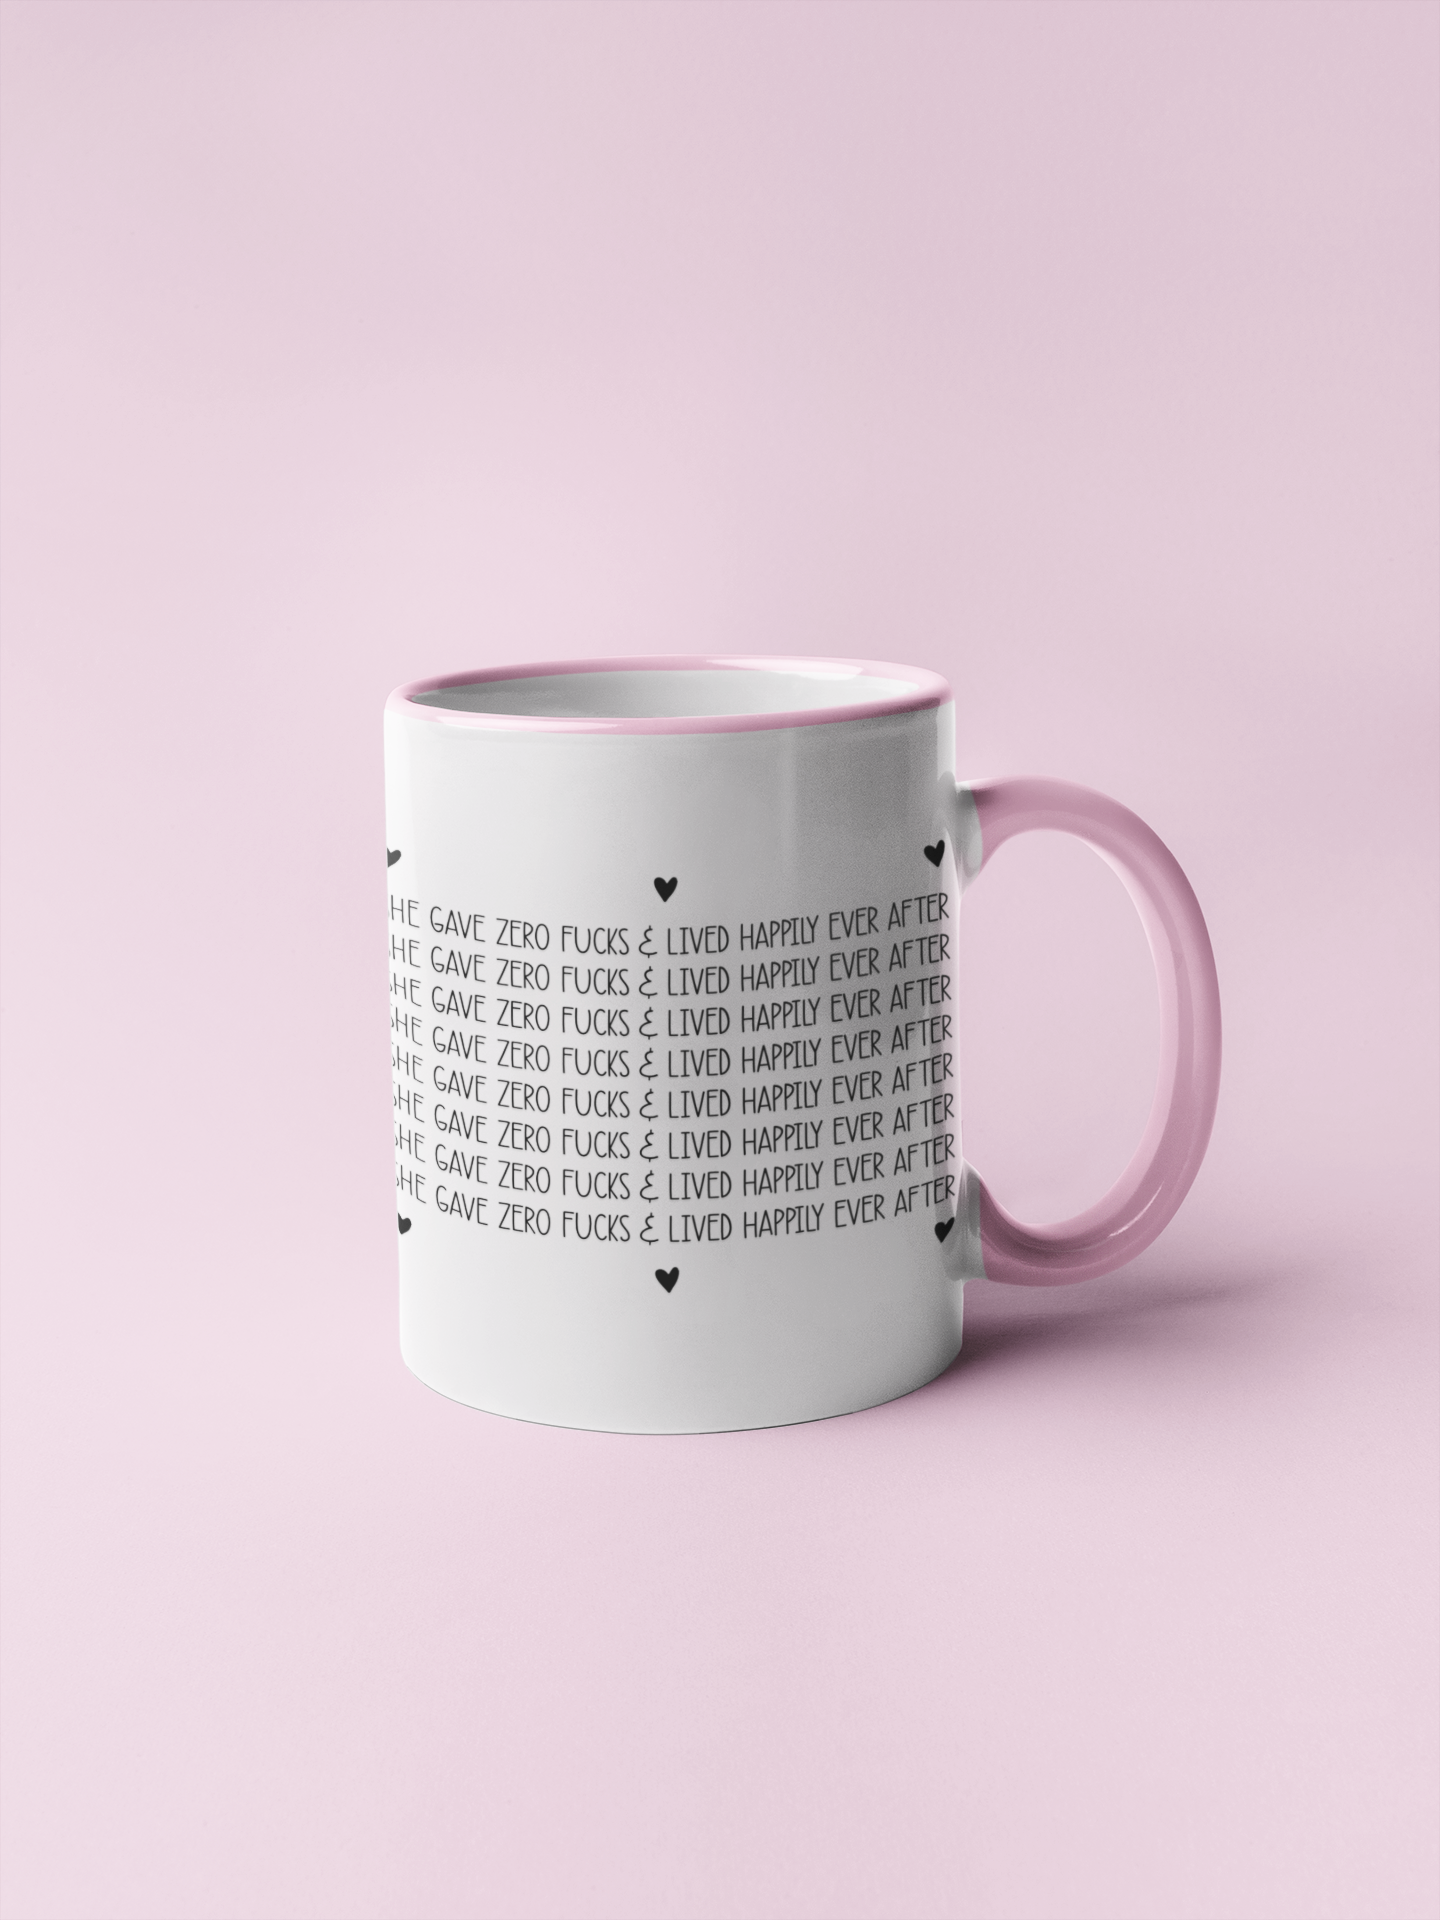 White mug with a pink handle & rim with a repetitive design which says she gave zero fucks and lived happily ever after, with black  hearts surrounding the design.